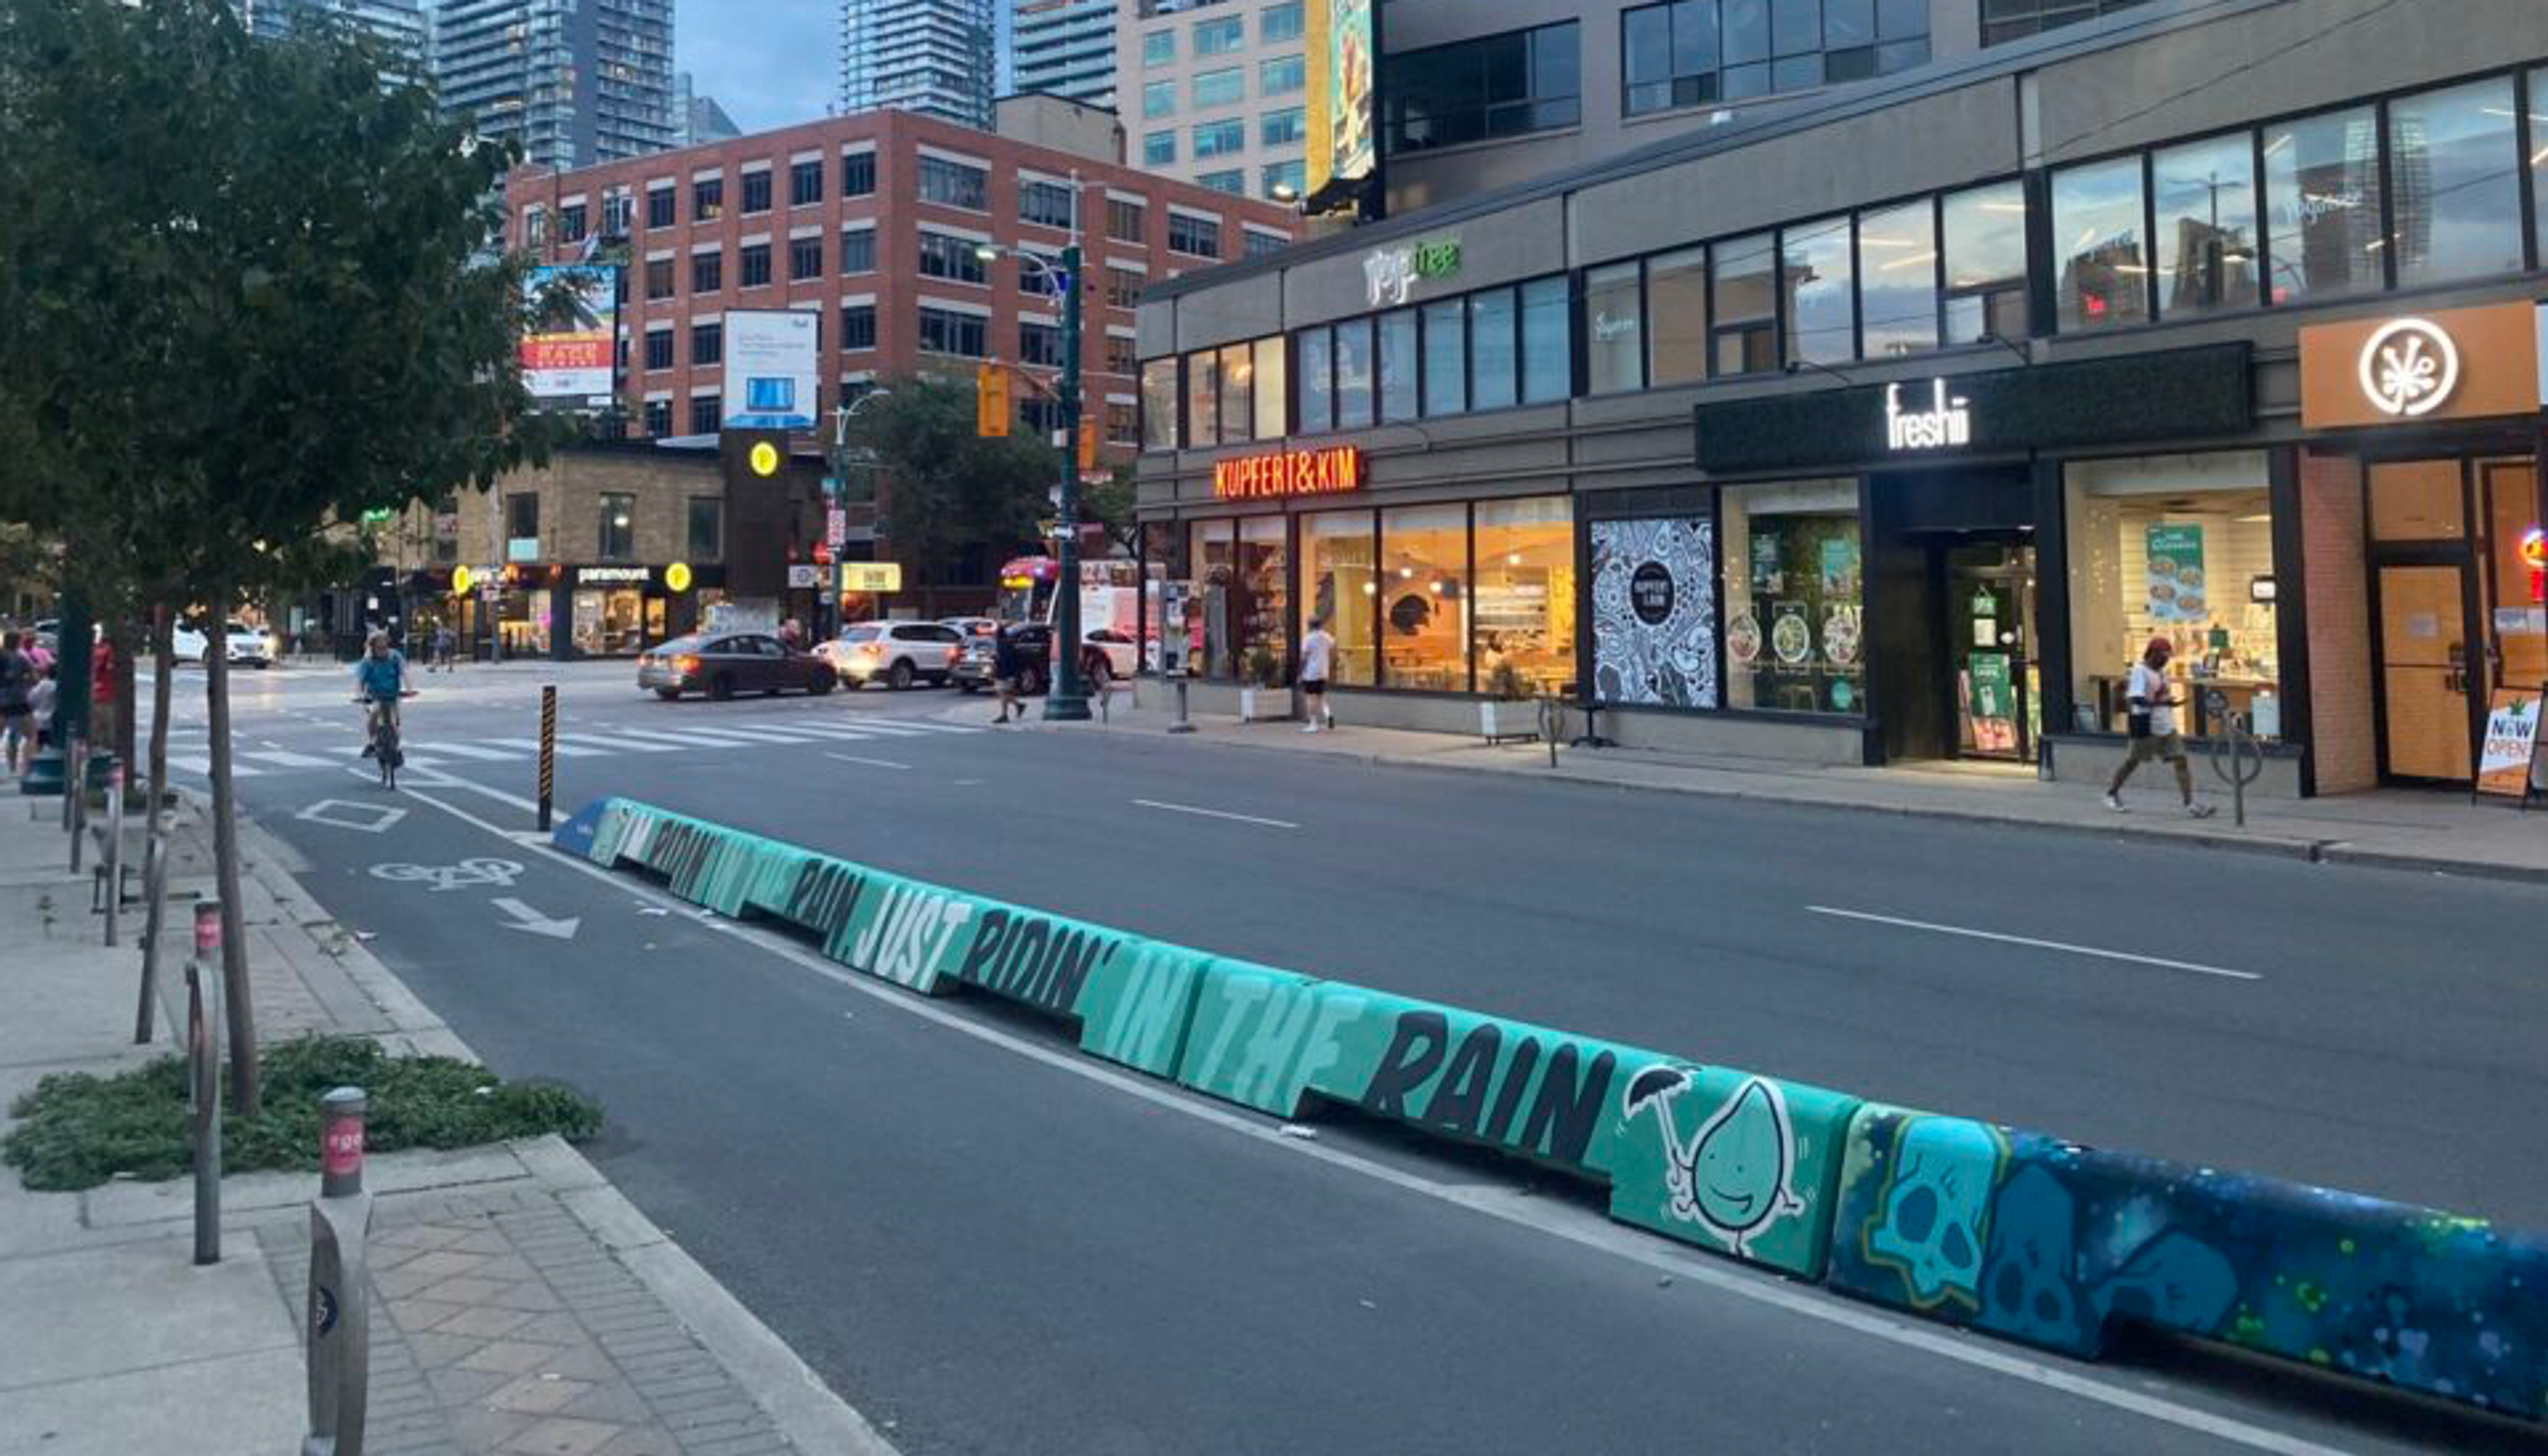 A bike lane in Toronto protected by a low concrete barrier, decorated in pastel colors with the words "Just ridin' in the rain" painted.